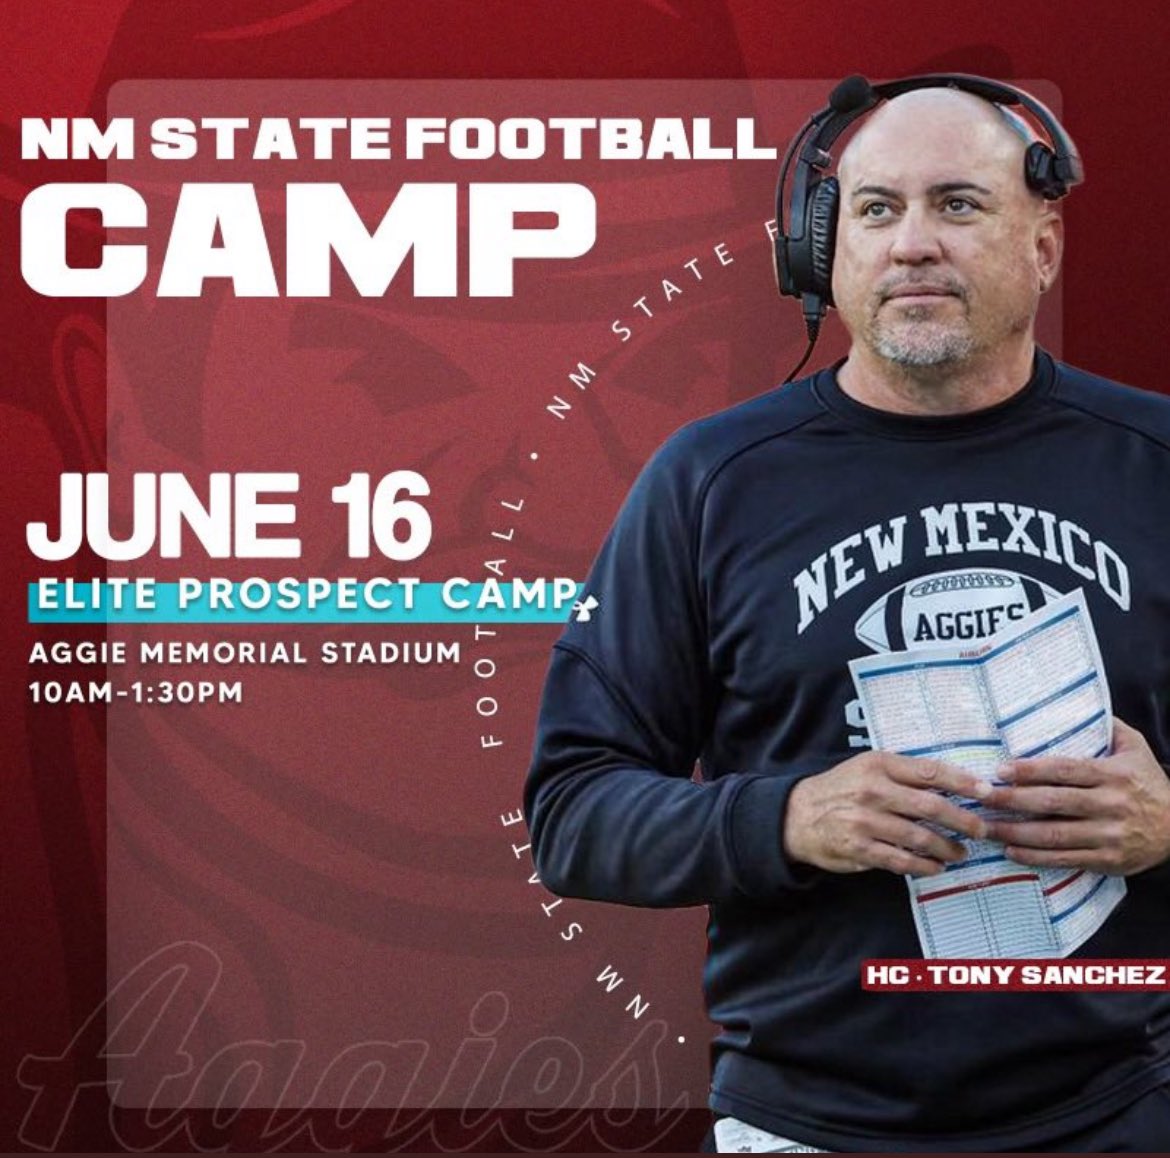 Thankful to be invited to showcase my talents at NMSU!